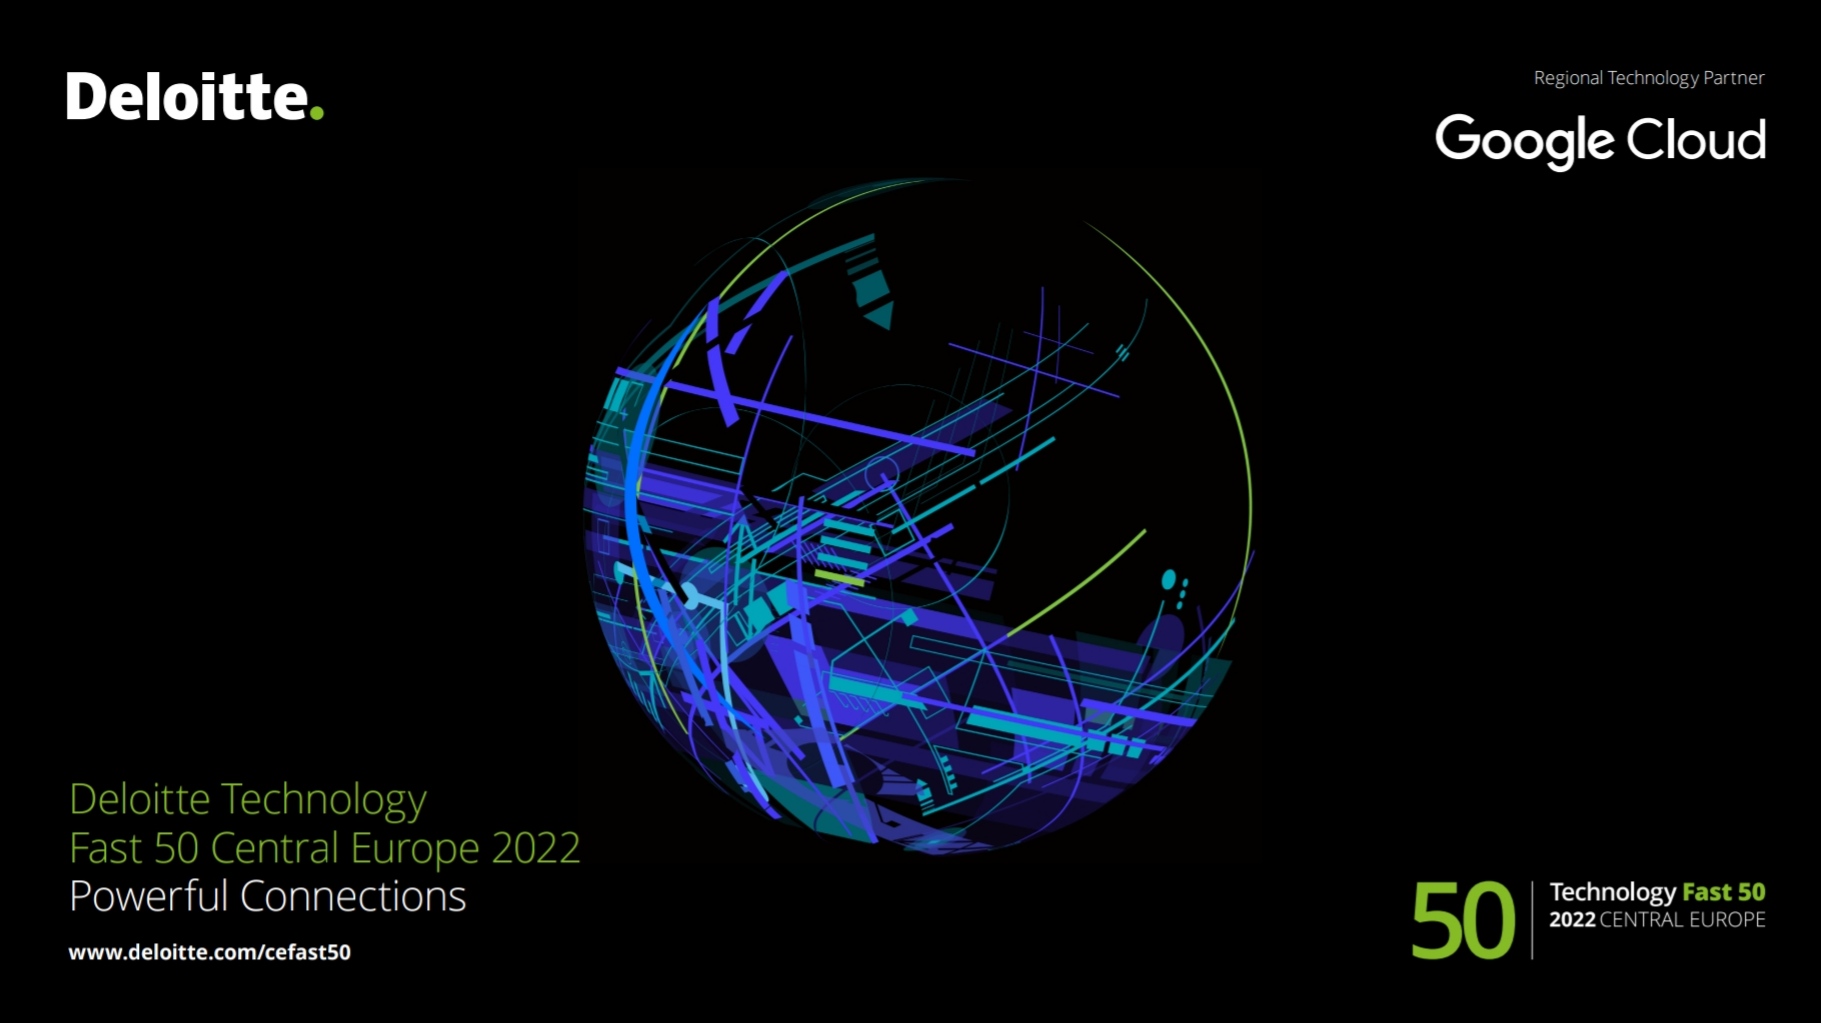 Factory rated in the top 6 fastest growing companies on the Deloitte Technology Fast 50 Central Europe 2022 list